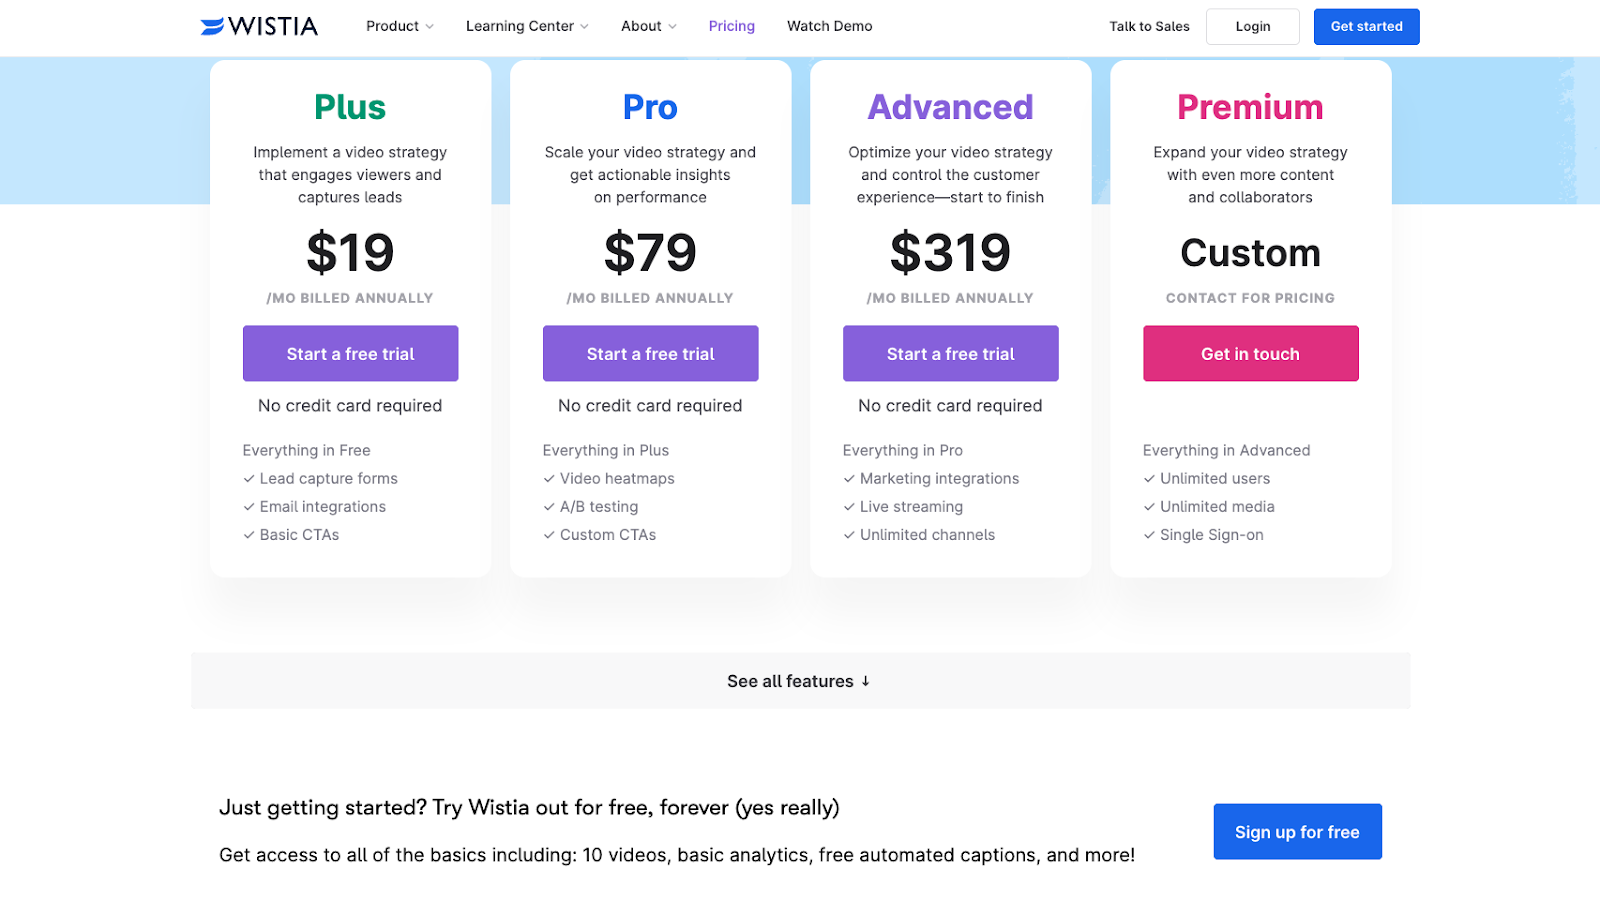 Wistia's Pricing Plan Page